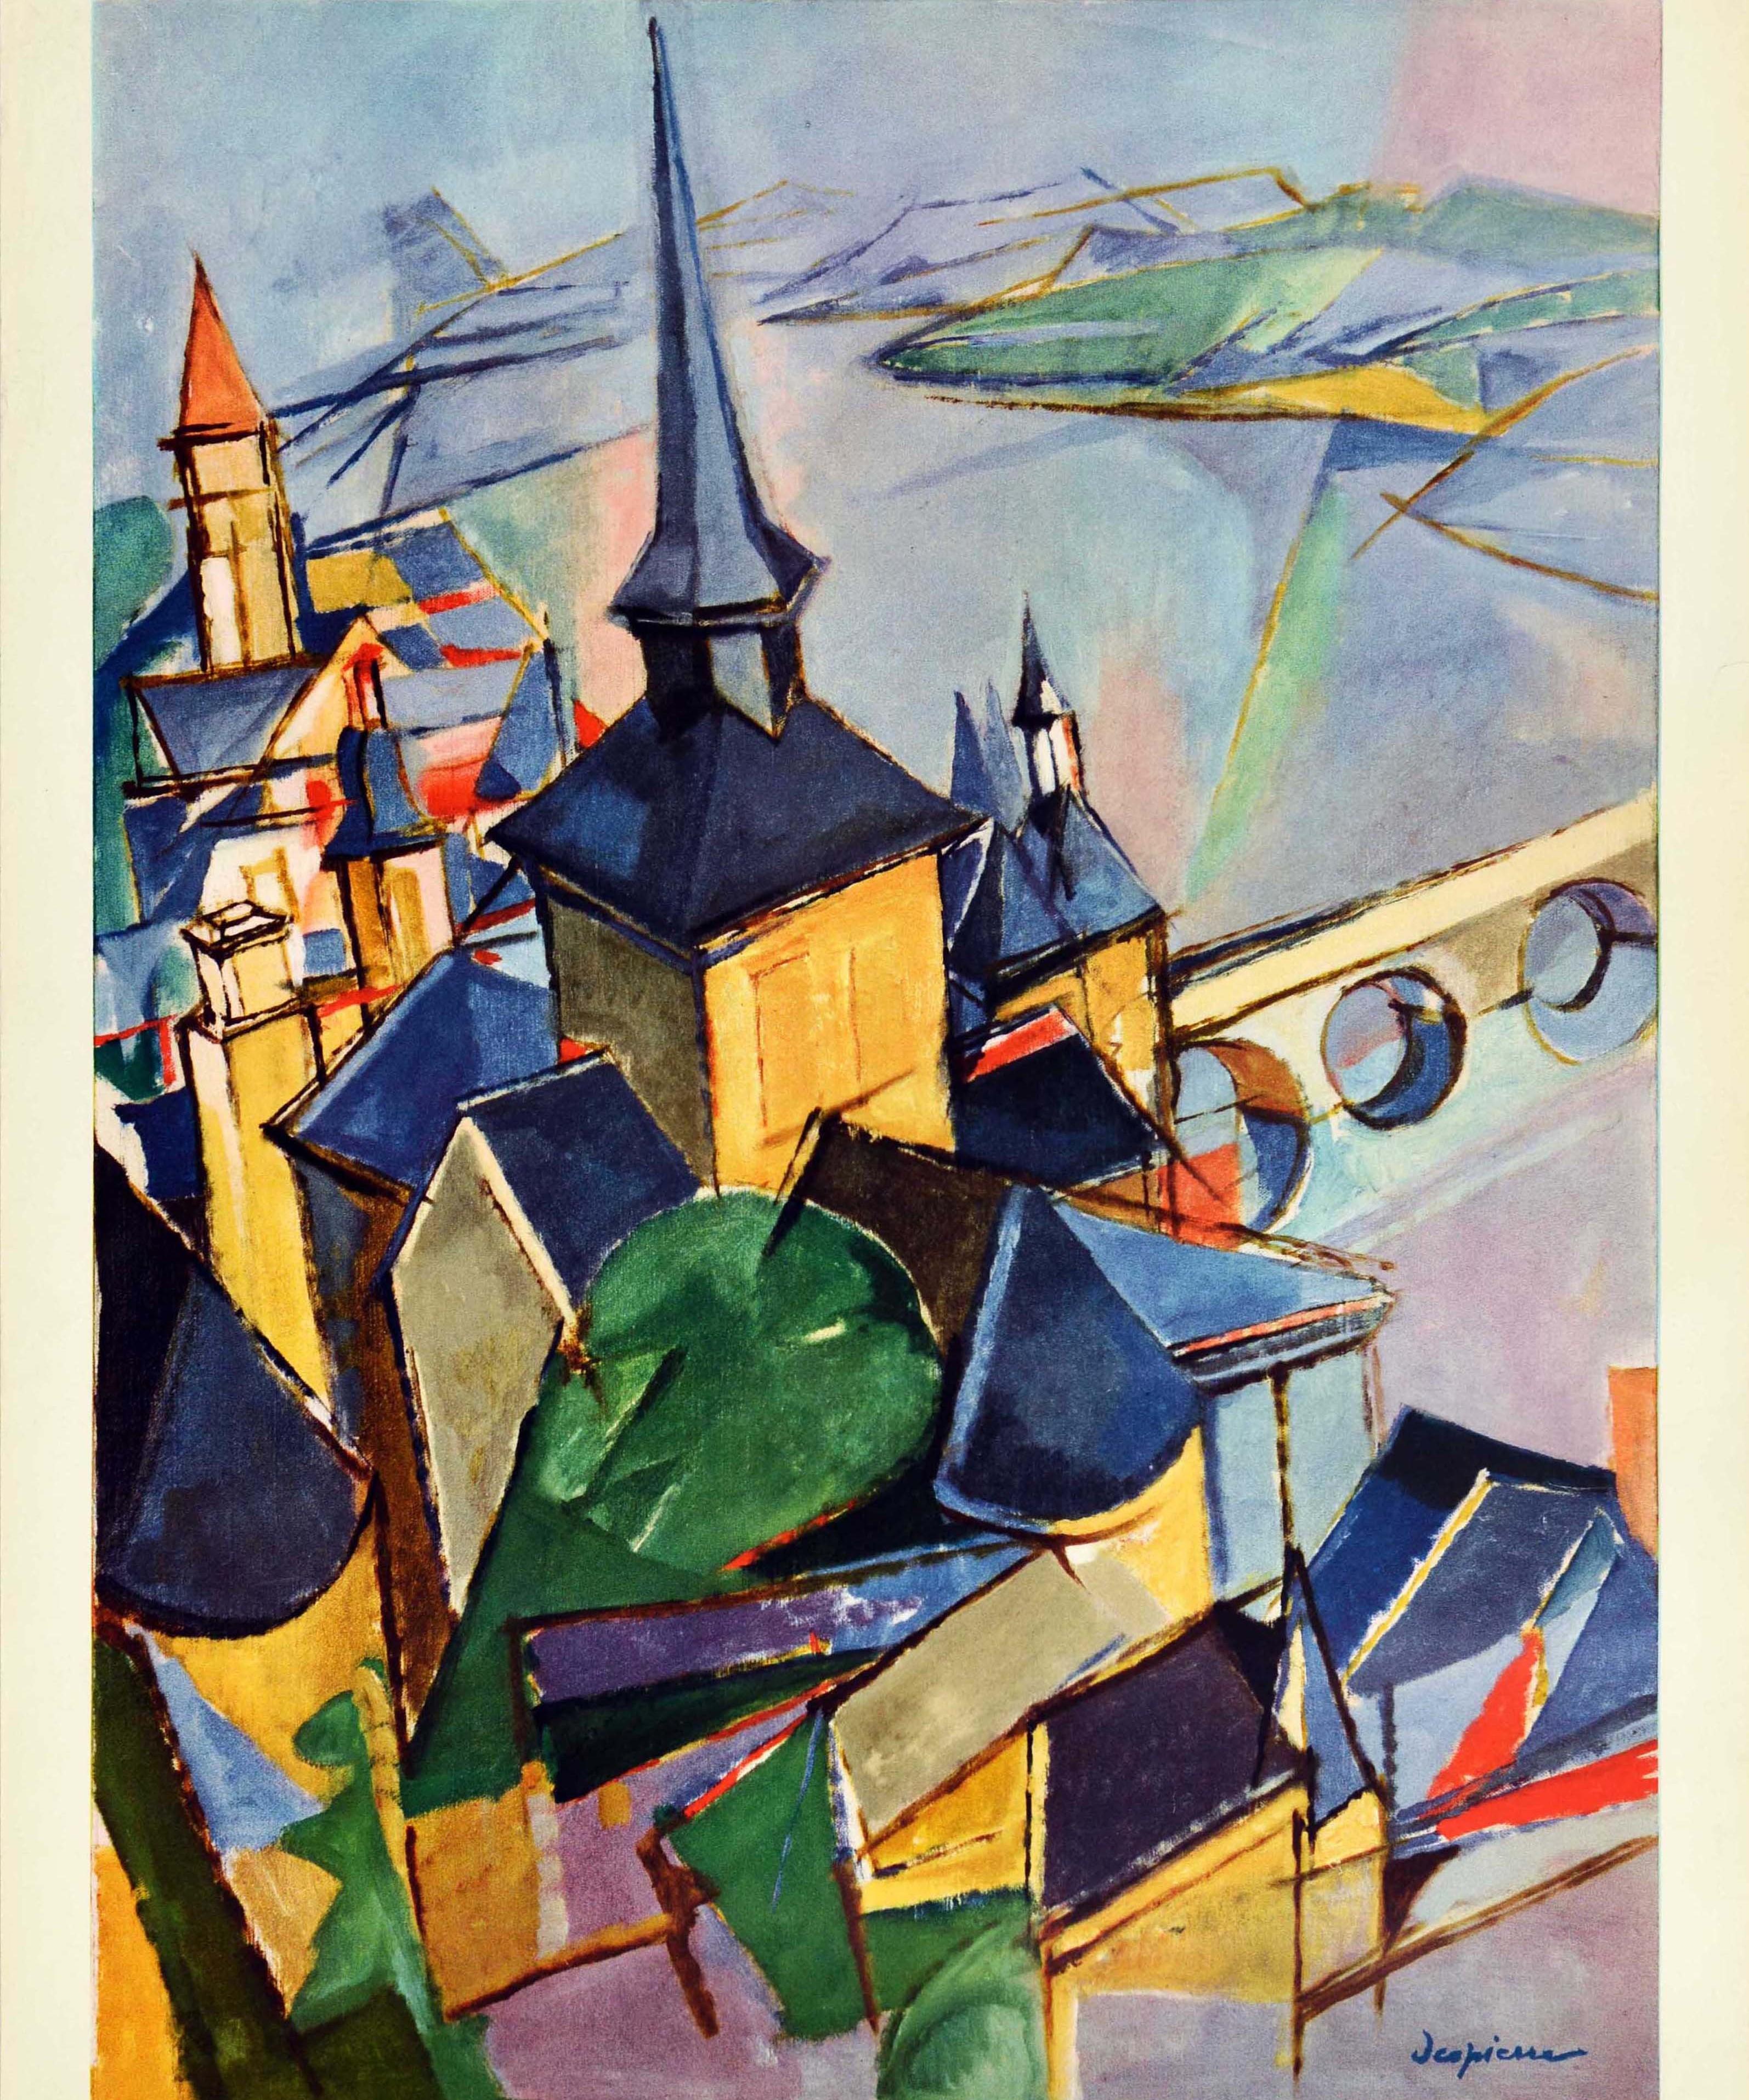 French Original Vintage Railway Travel Poster France Loire Valley River Cubist Painting